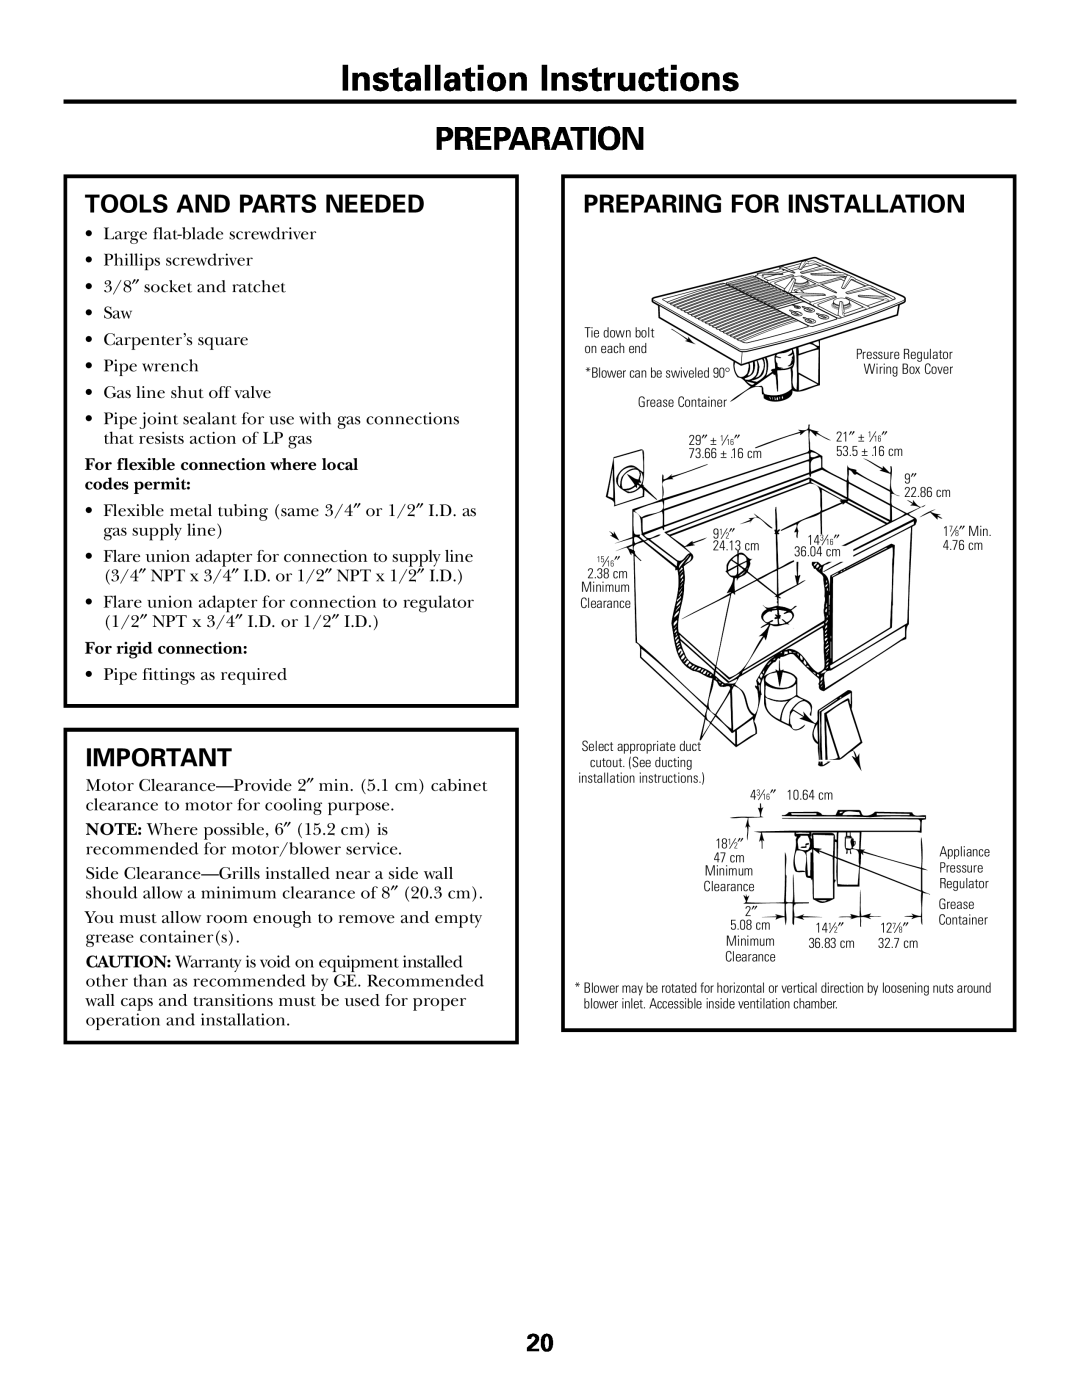 GE JGP985 Preparation, Installation Instructions, Tools And Parts Needed, Preparing For Installation, For rigid connection 